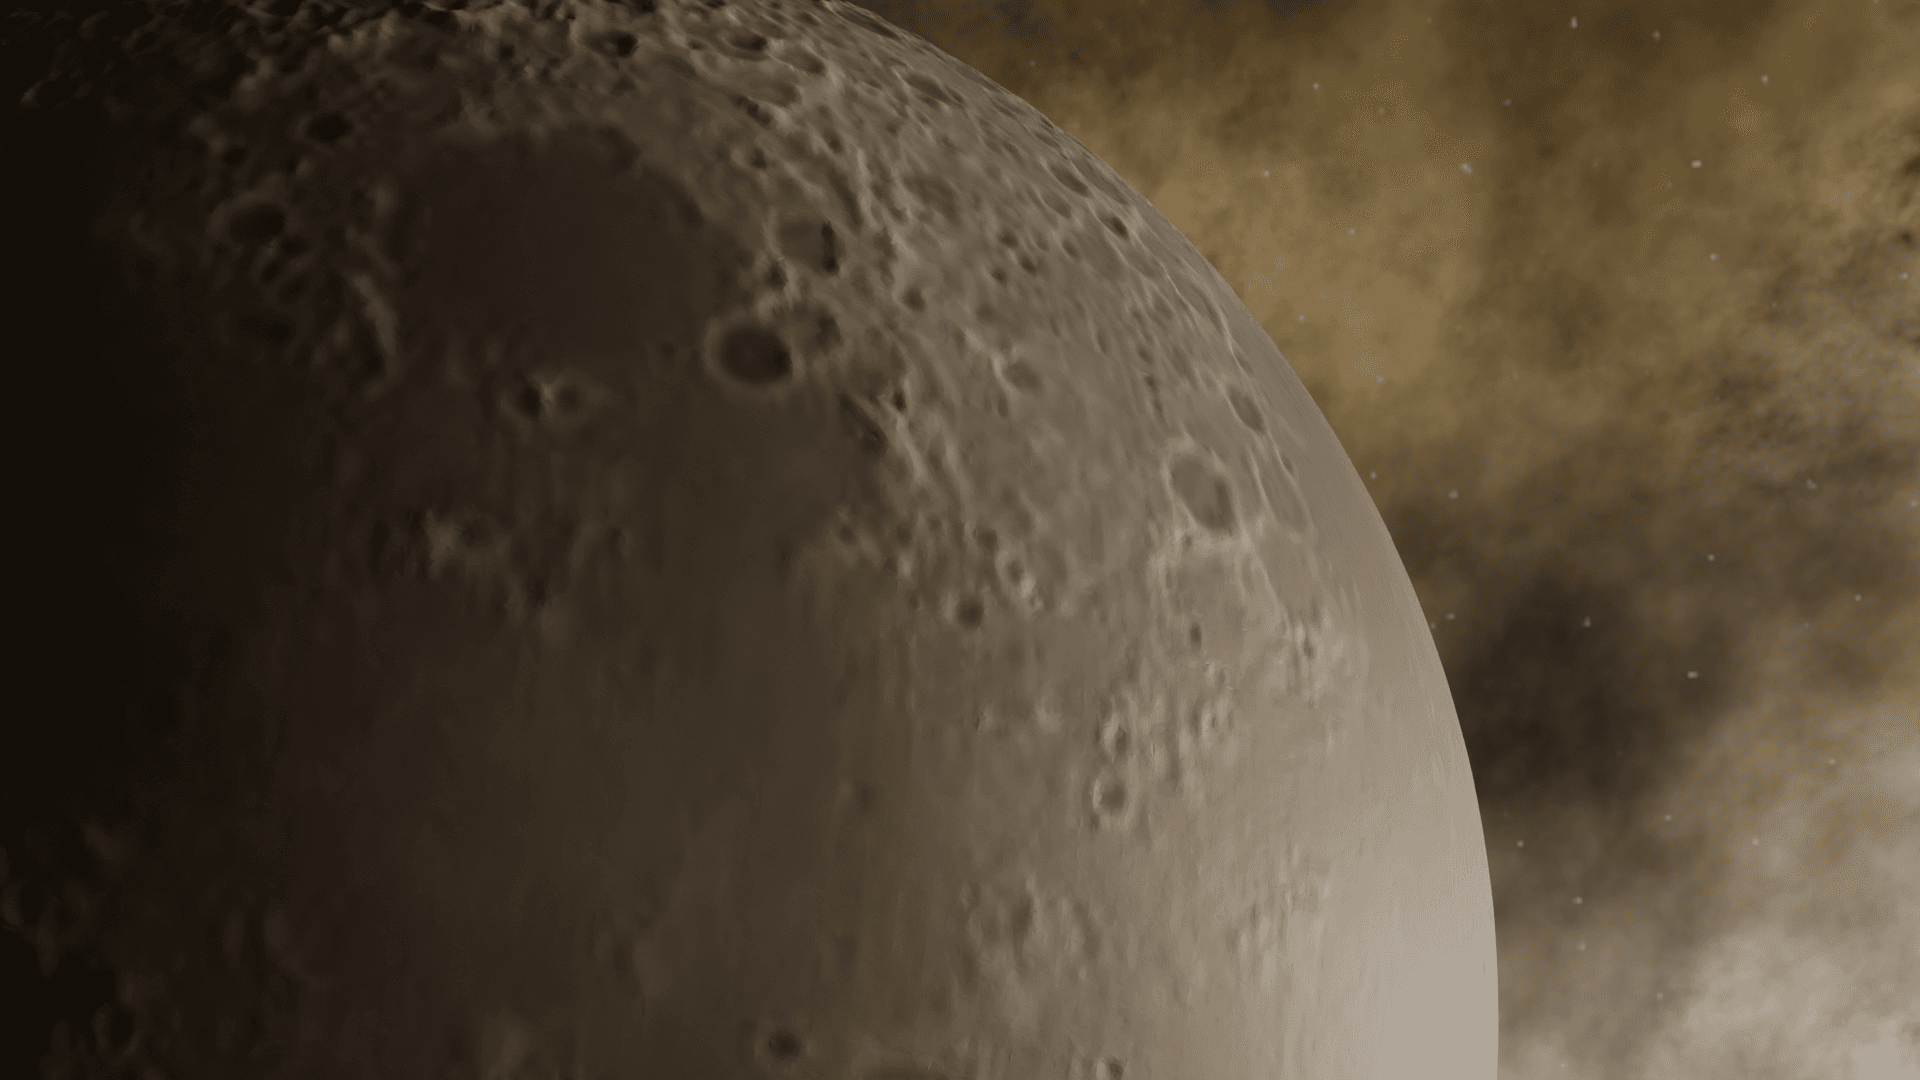 MOON 1 MILLION TO 1 SCALE 3d model